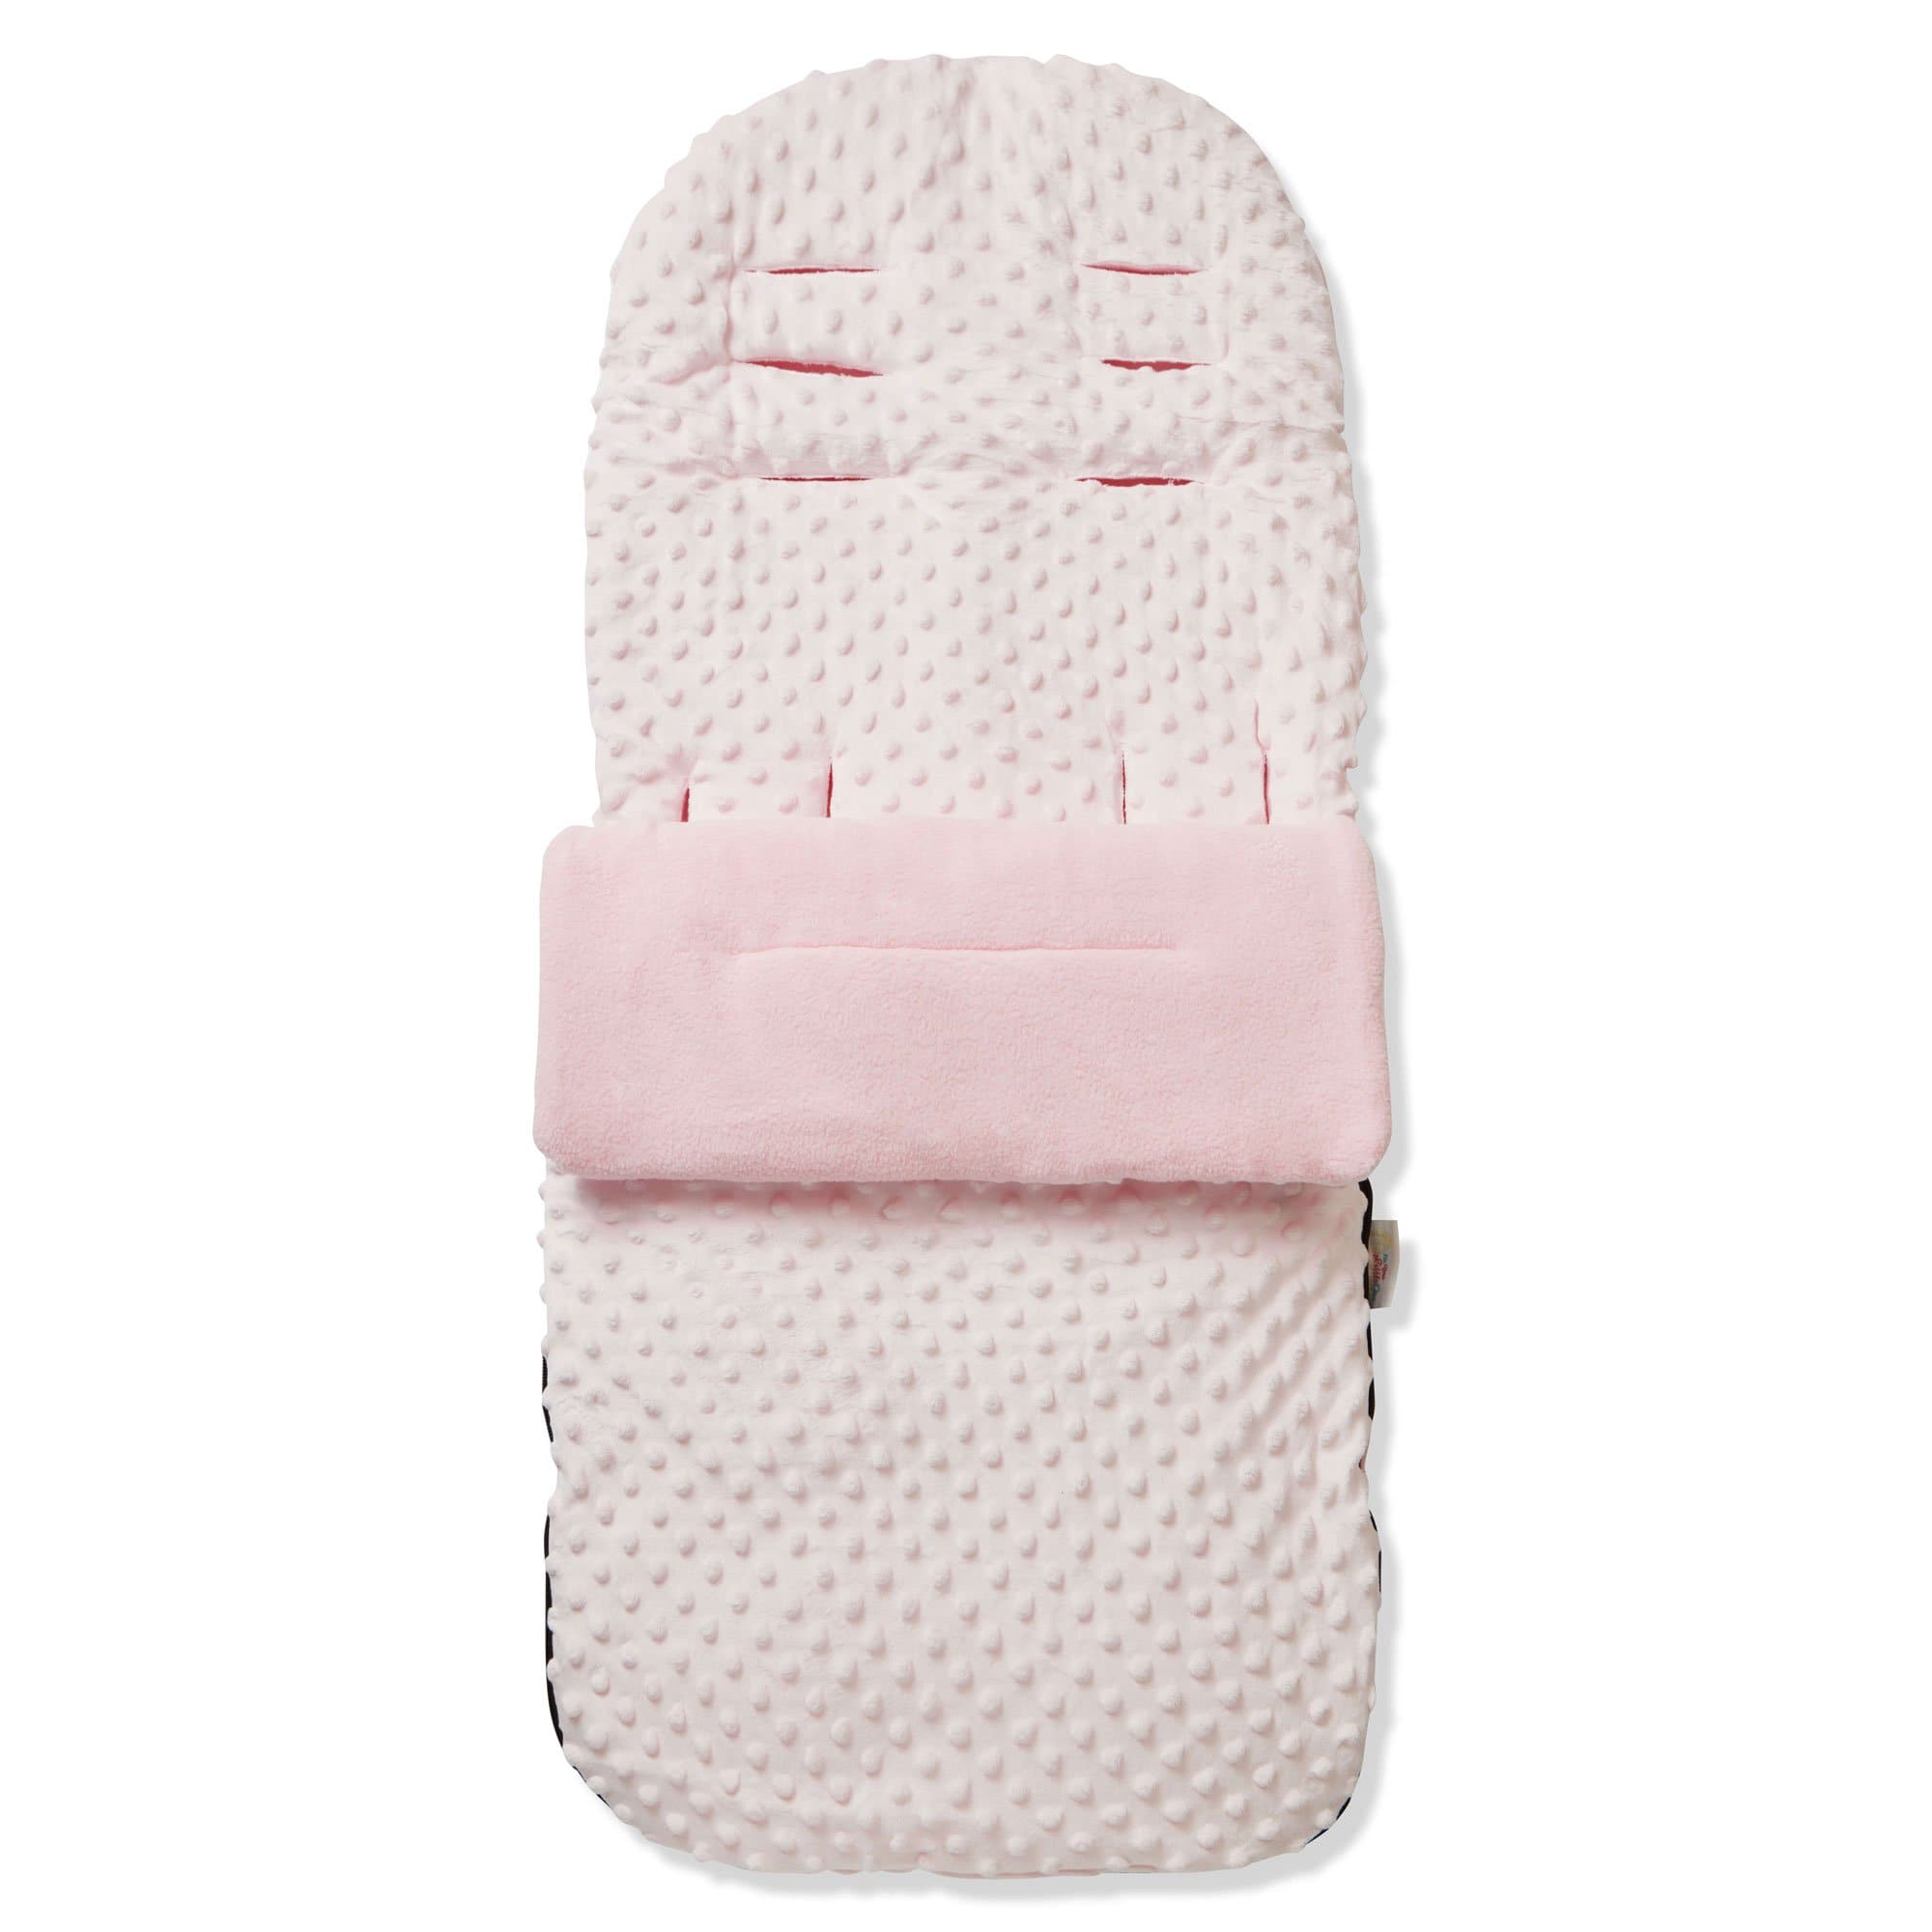 Dimple Footmuff / Cosy Toes Compatible with ABC Design - Pink / Fits All Models | For Your Little One